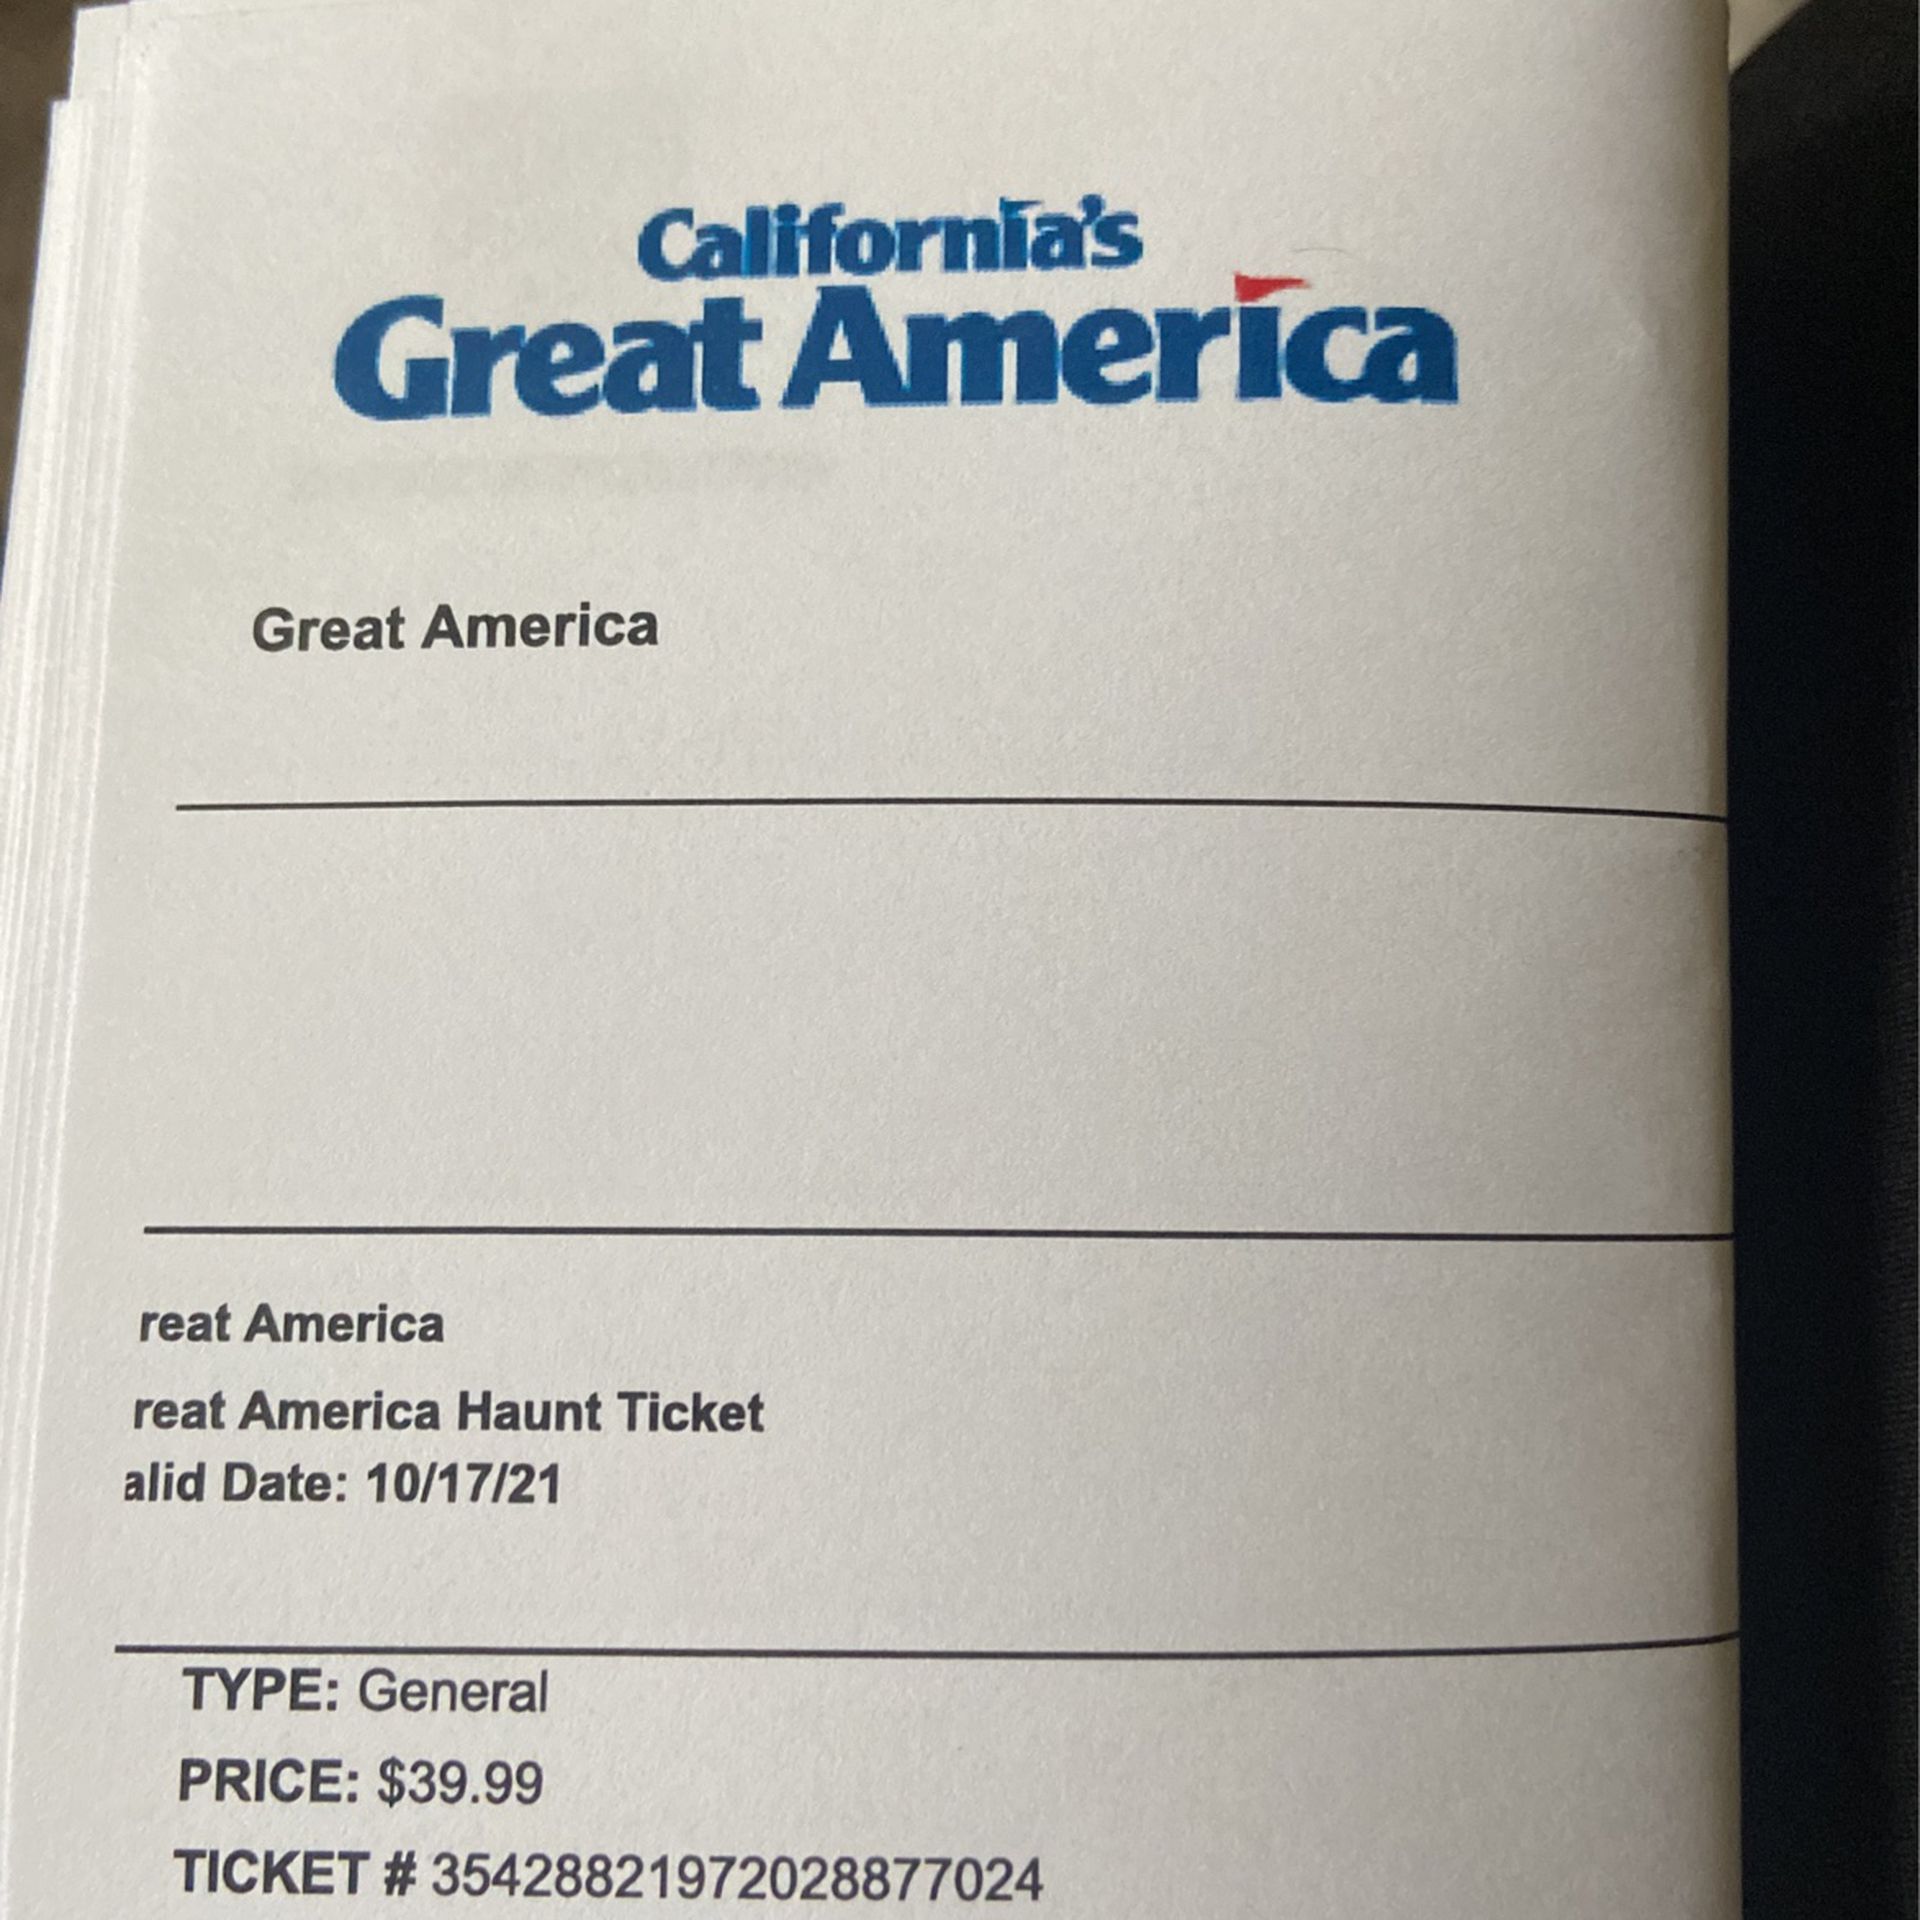 Great America tickets